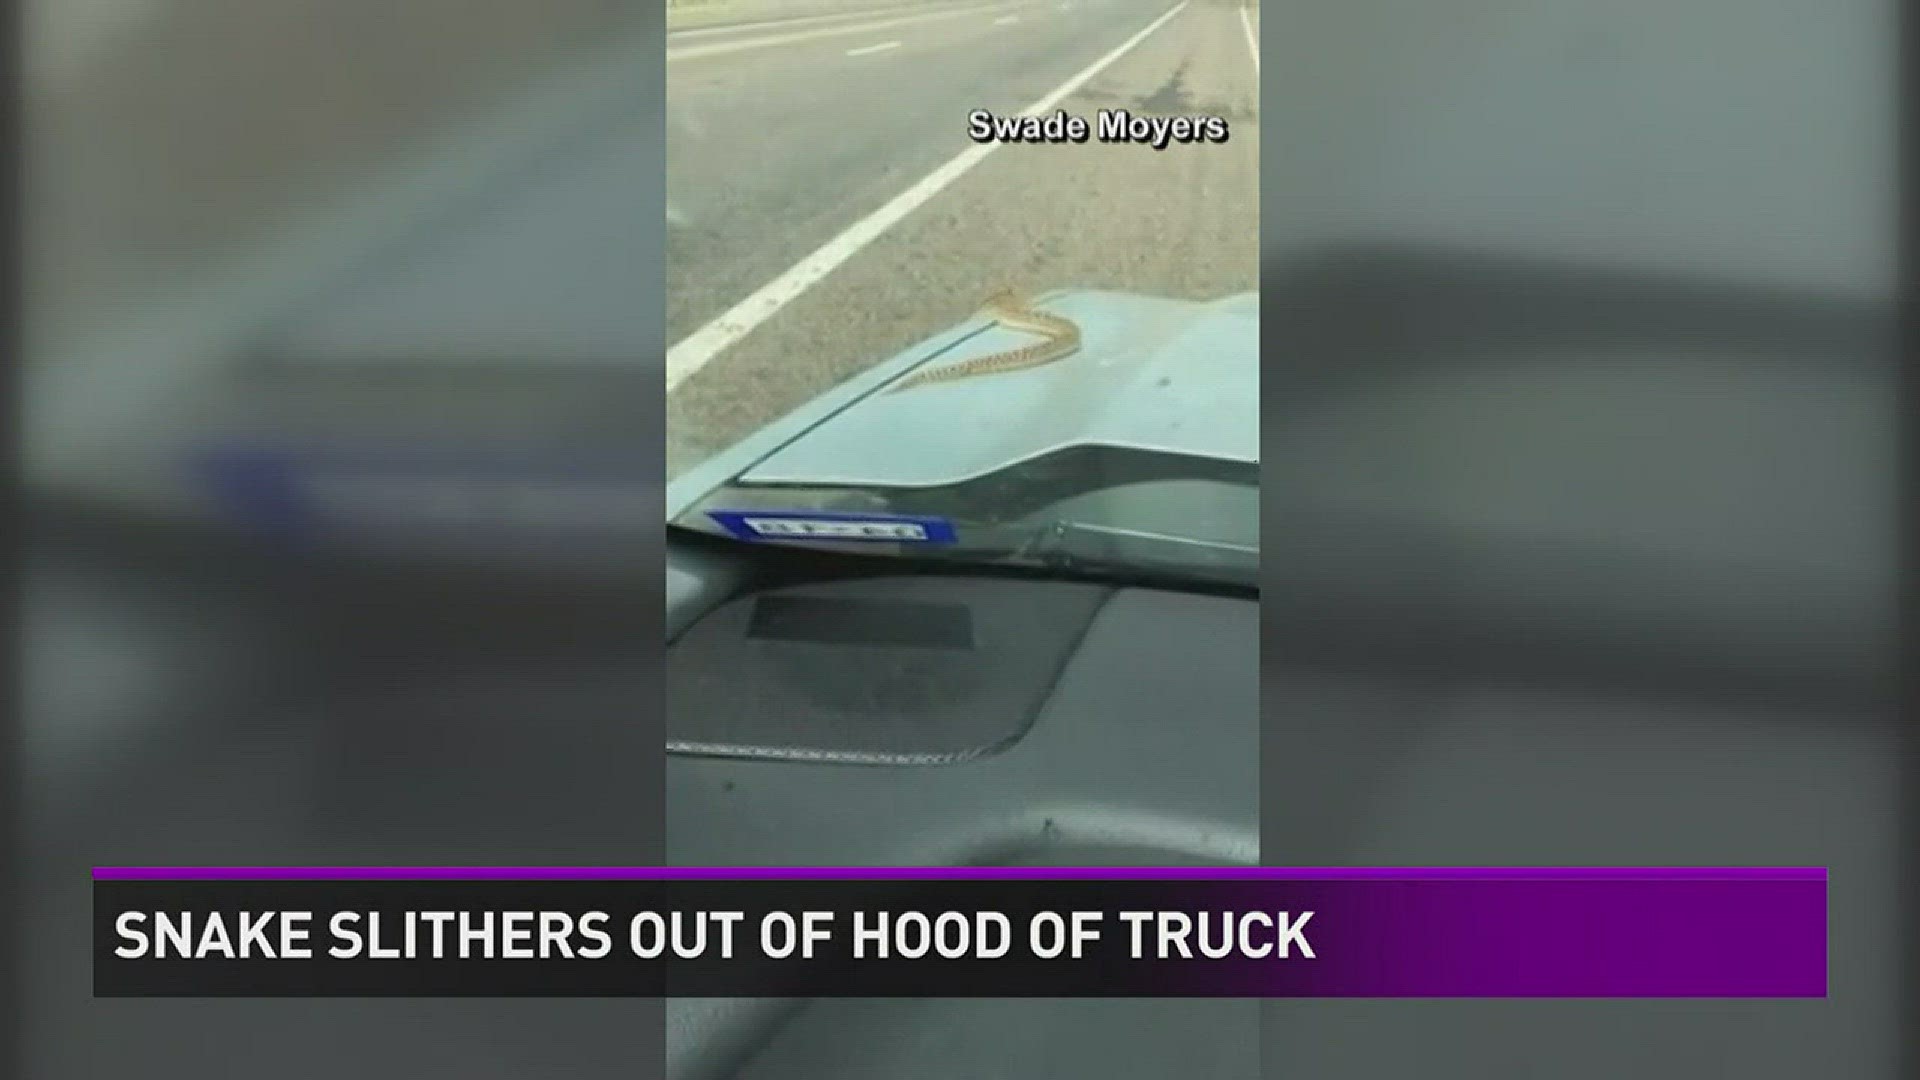 One Texas driver got quite a surprise coming out of the hood of his truck!